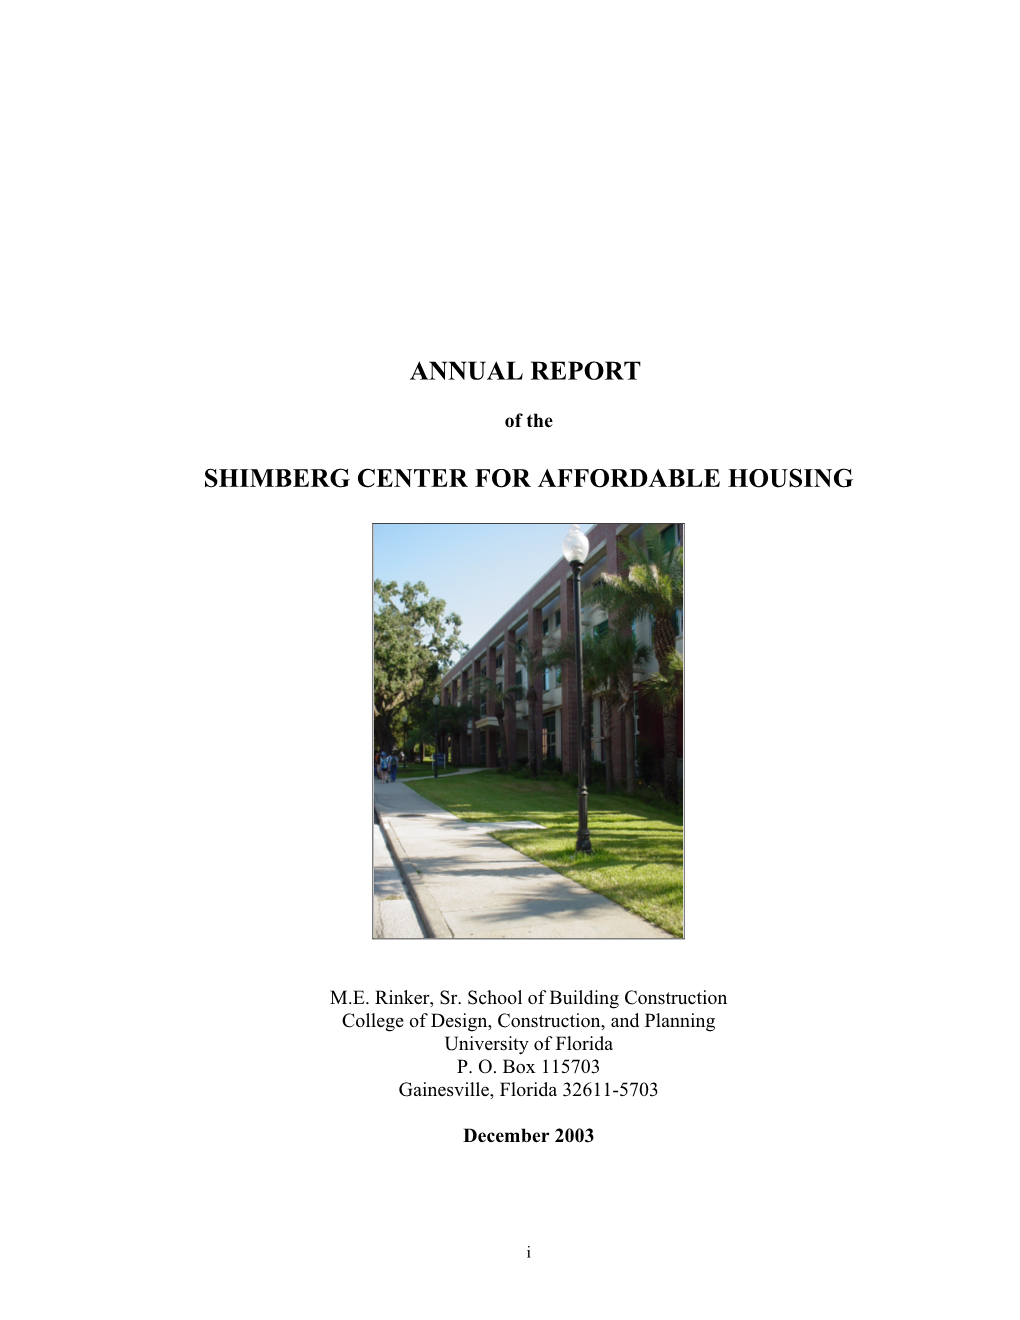 2003 Annual Report of the Shimberg Center for Affordable Housing